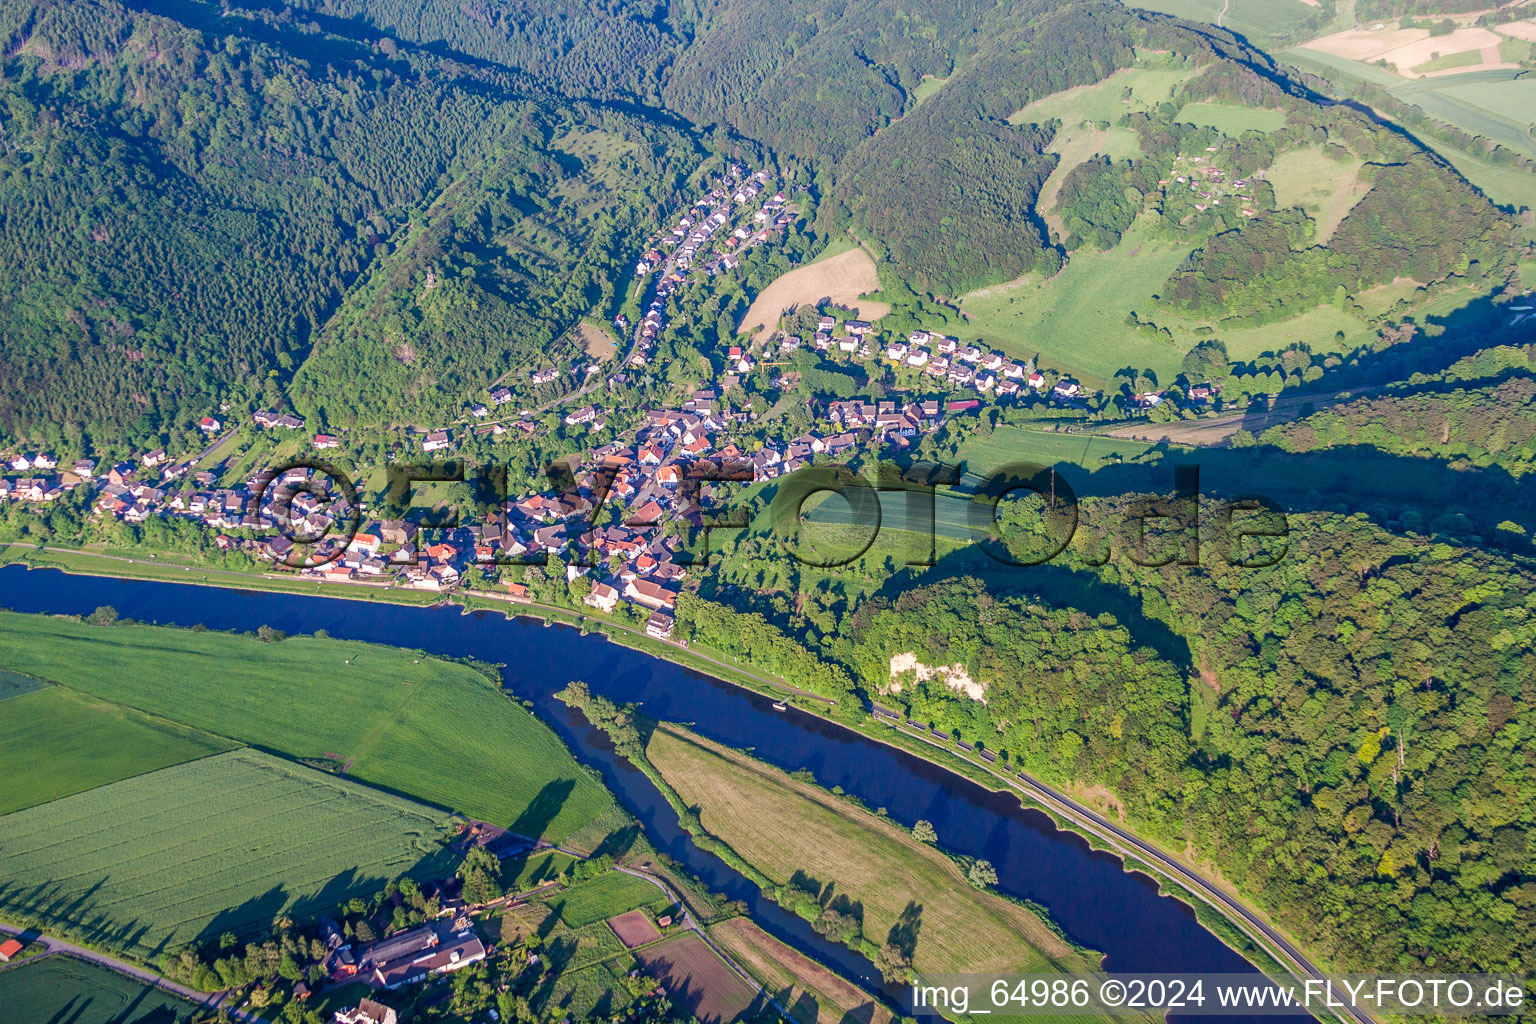 Village on the river bank areas of the Weser river in the district Ruehle in Bodenwerder in the state Lower Saxony, Germany